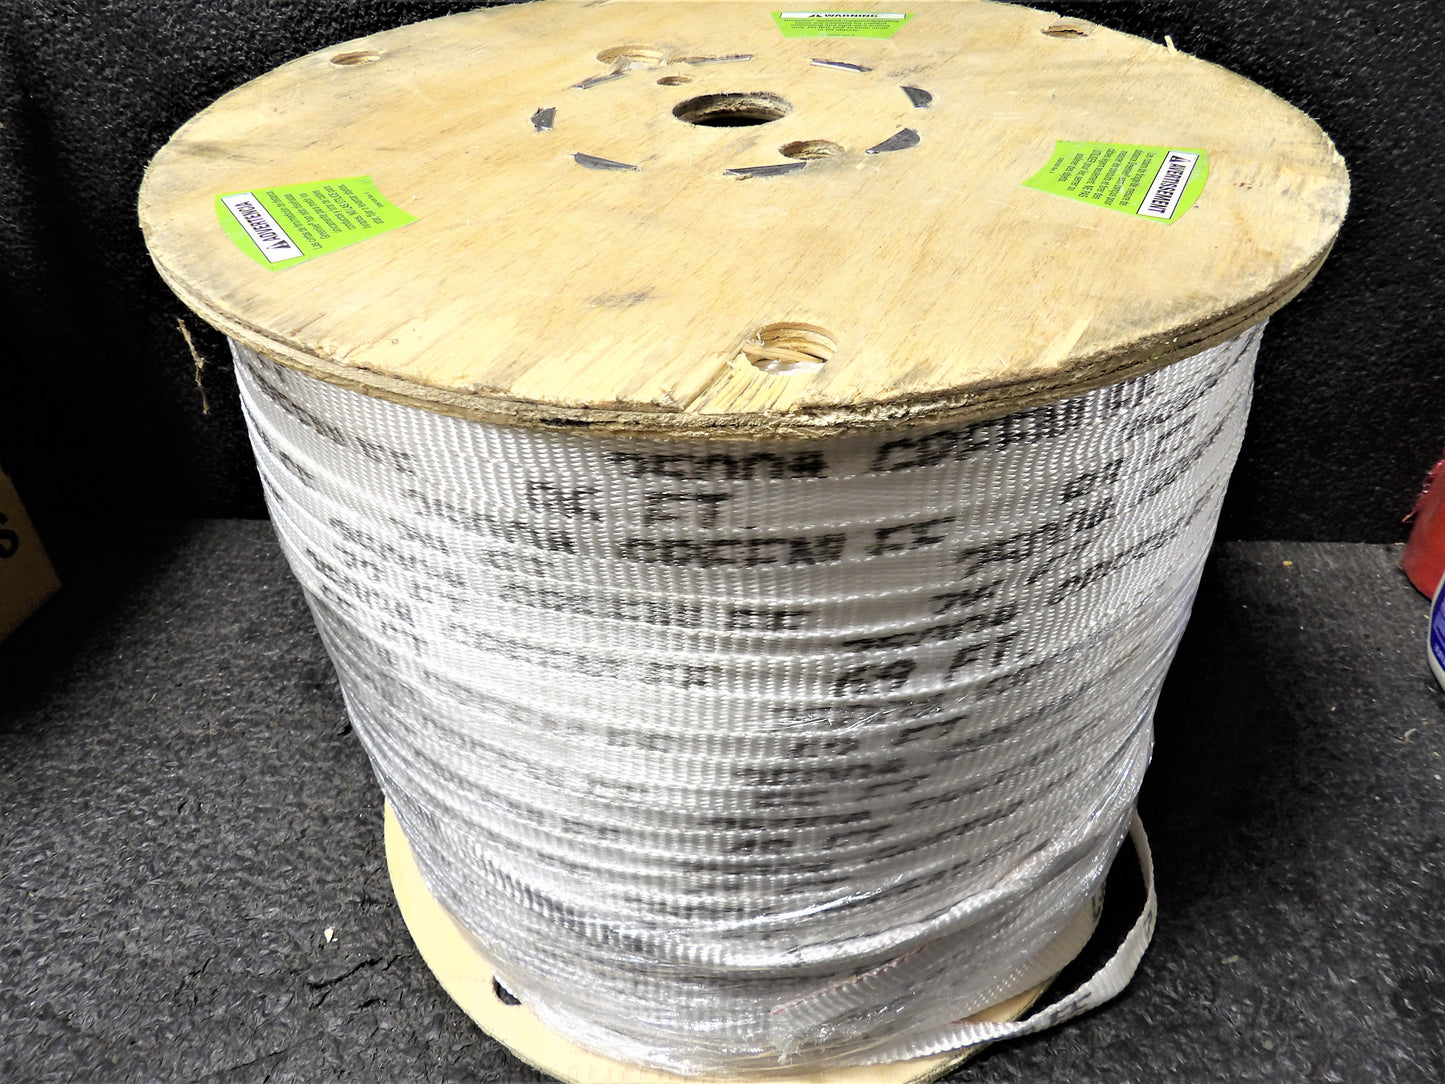 Greenlee 10447 4437 3/4" x 3,000' Polyester Measure/Pulling Tape (CR00860-WTA24)